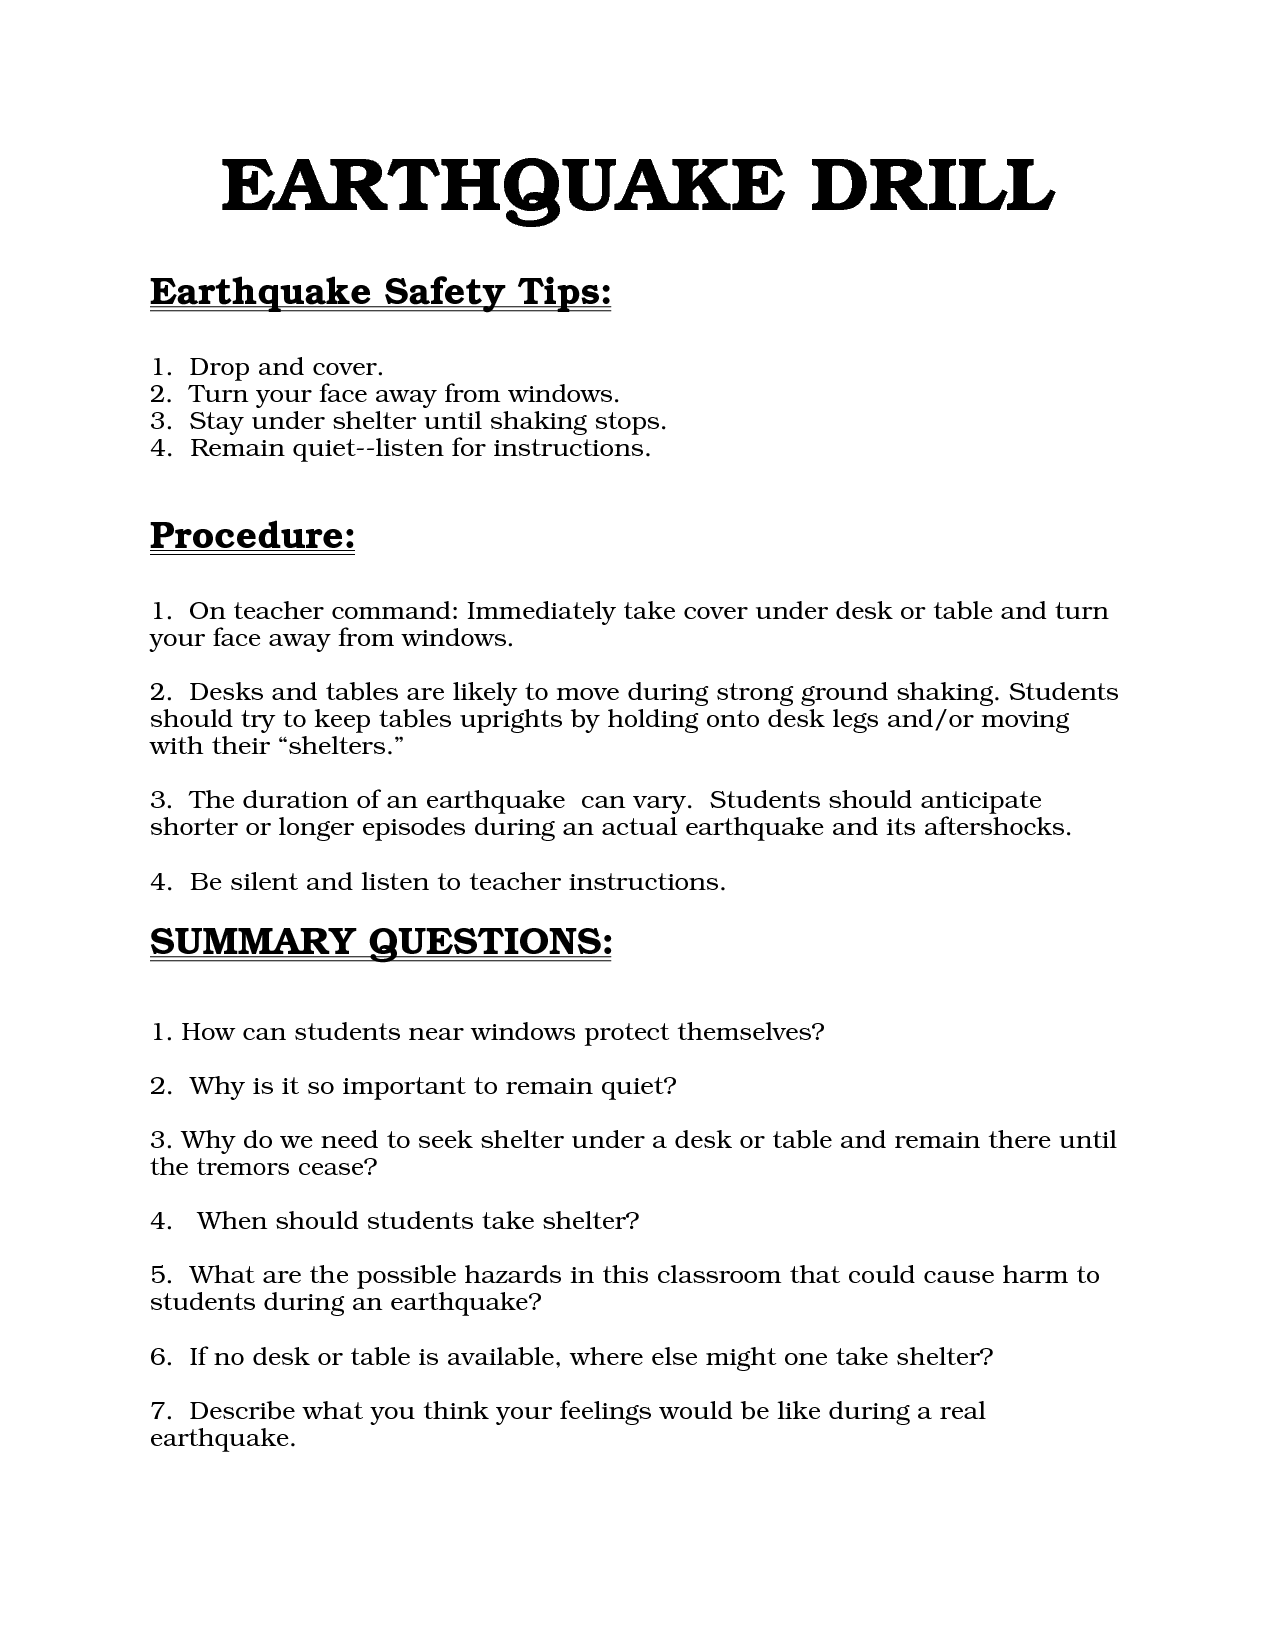 Earthquake Drill Education Quotes For Teachers Education Motivation Education